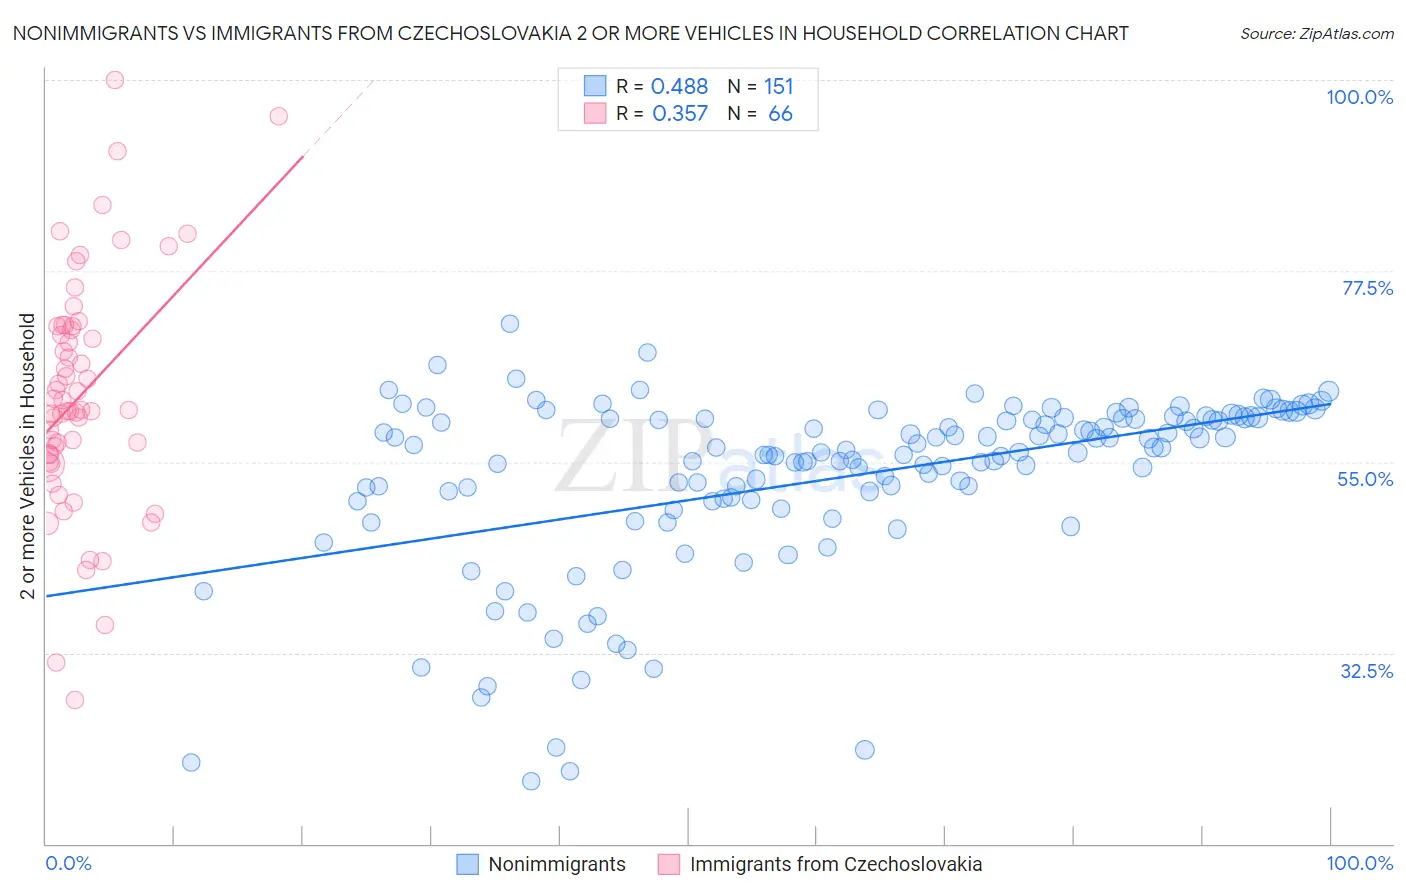 Nonimmigrants vs Immigrants from Czechoslovakia 2 or more Vehicles in Household